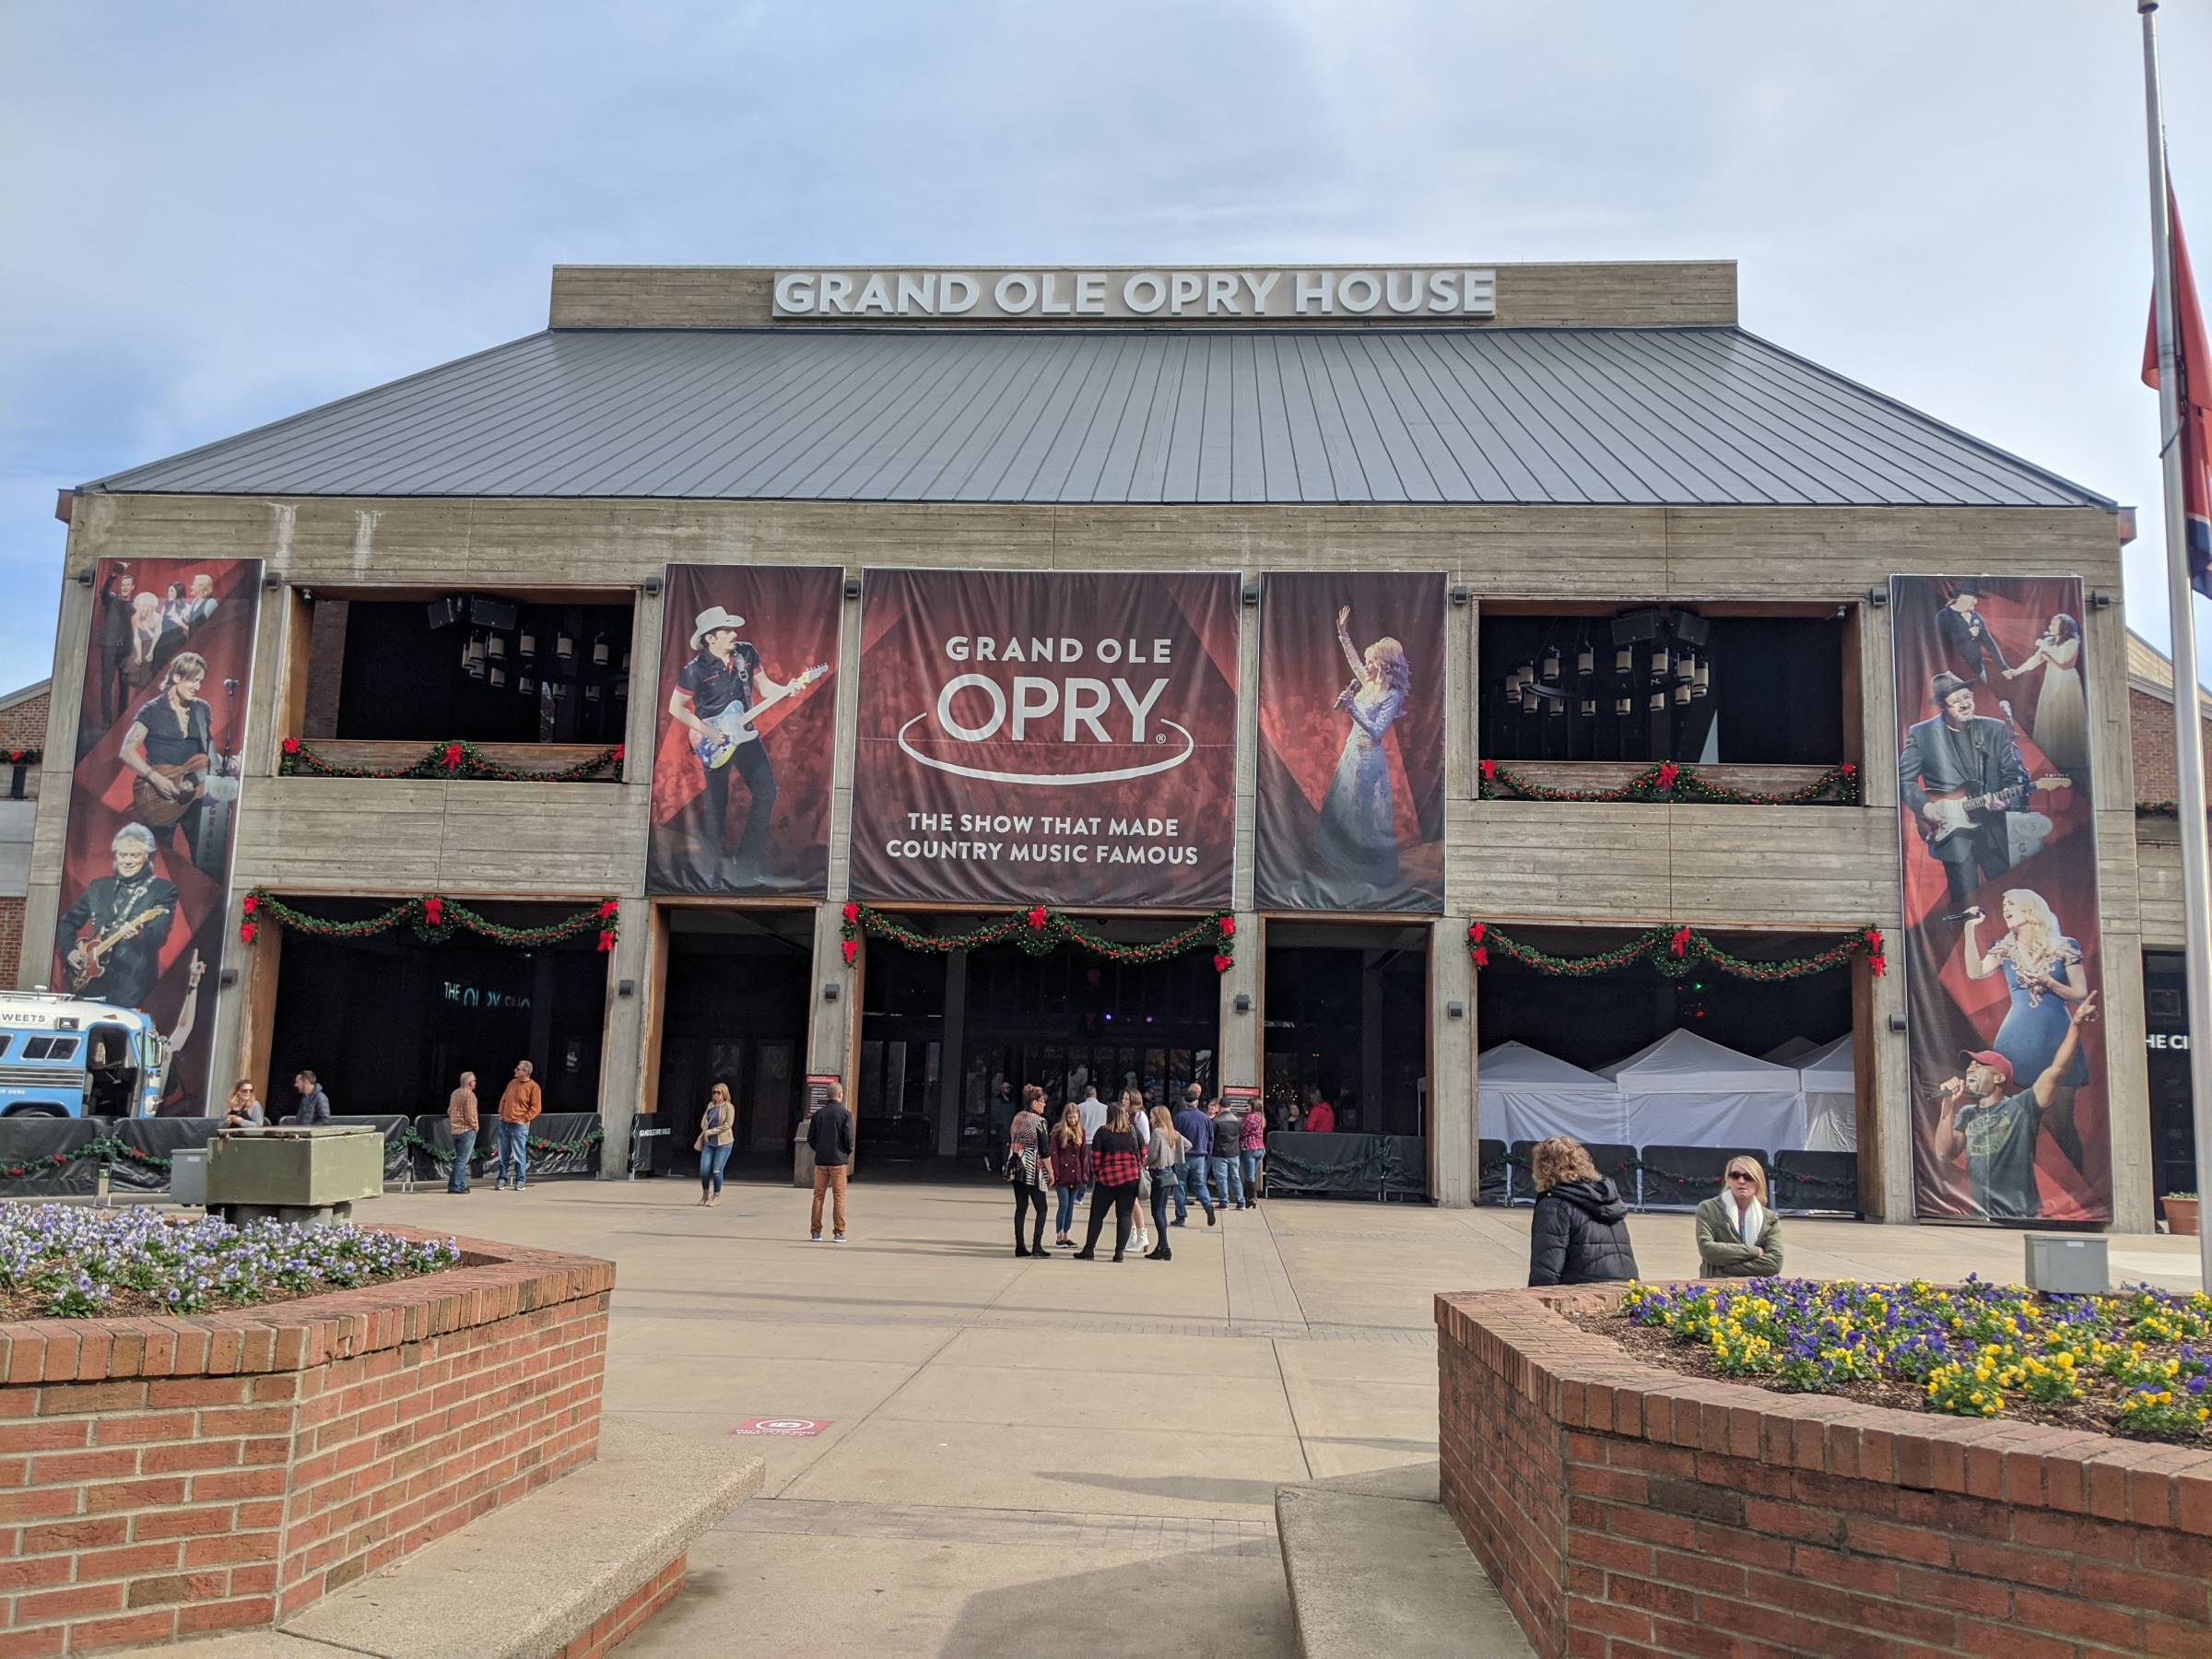 Outside the Grand Ole Opry House